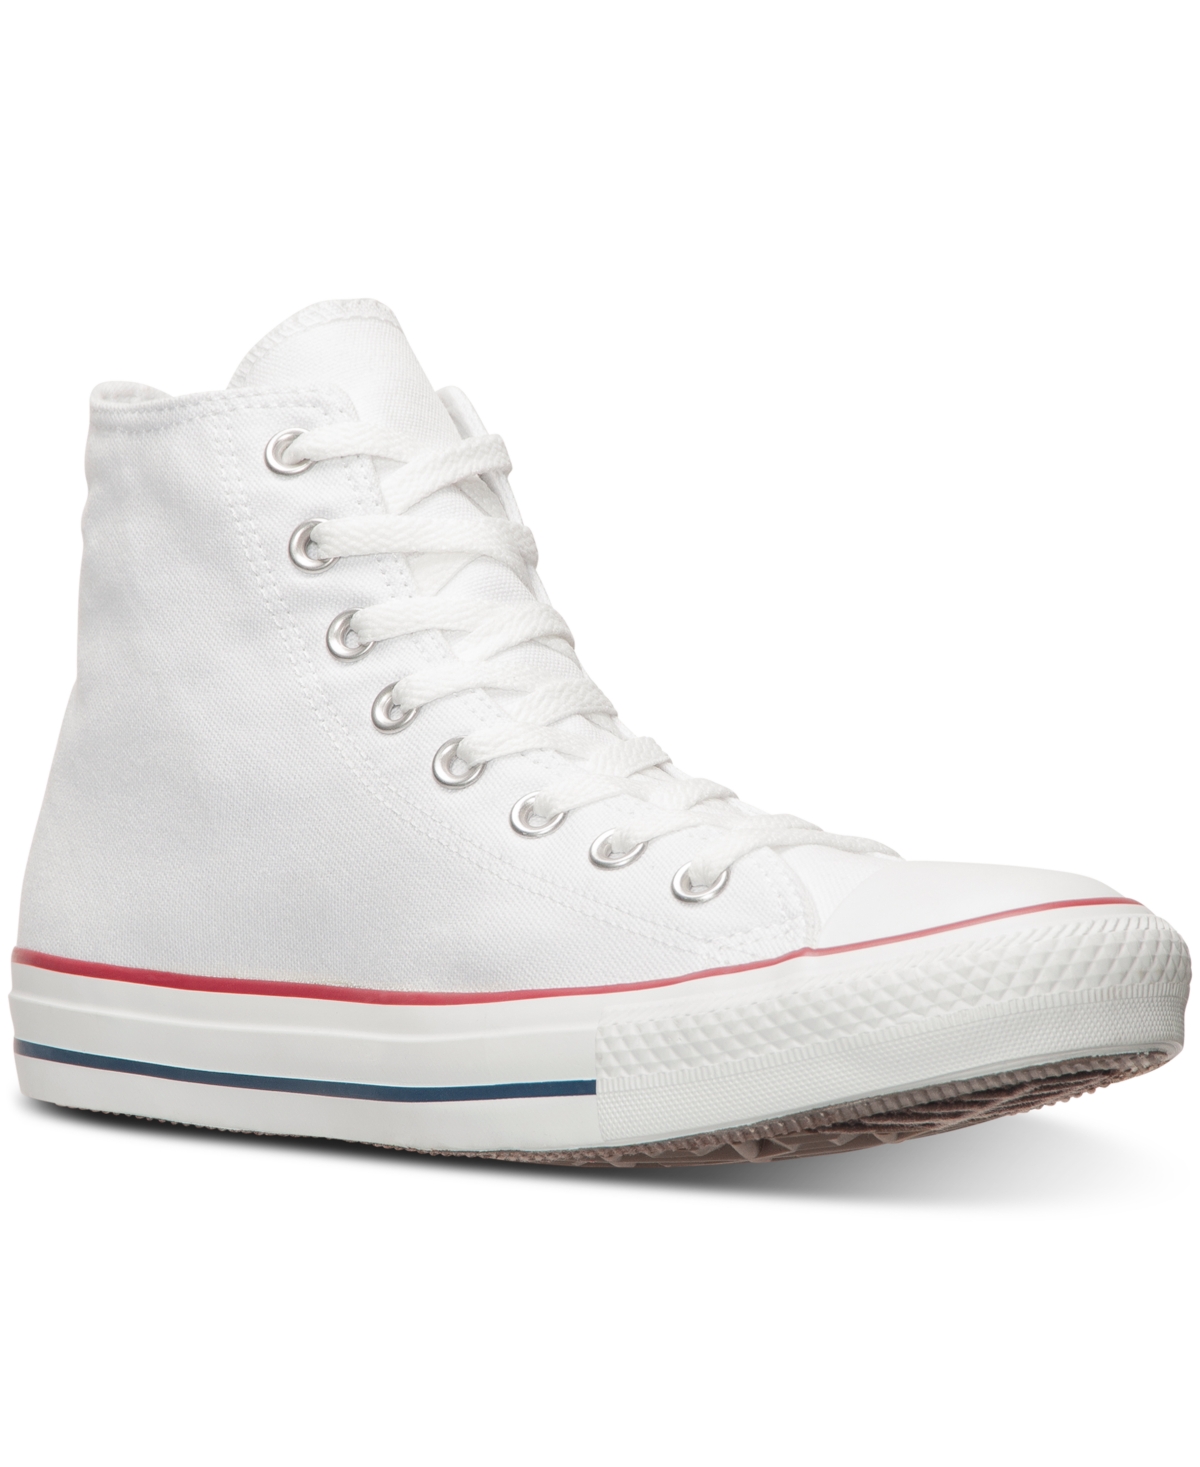 UPC 022859282659 product image for Converse Men's Chuck Taylor Hi Top Casual Sneakers from Finish Line | upcitemdb.com